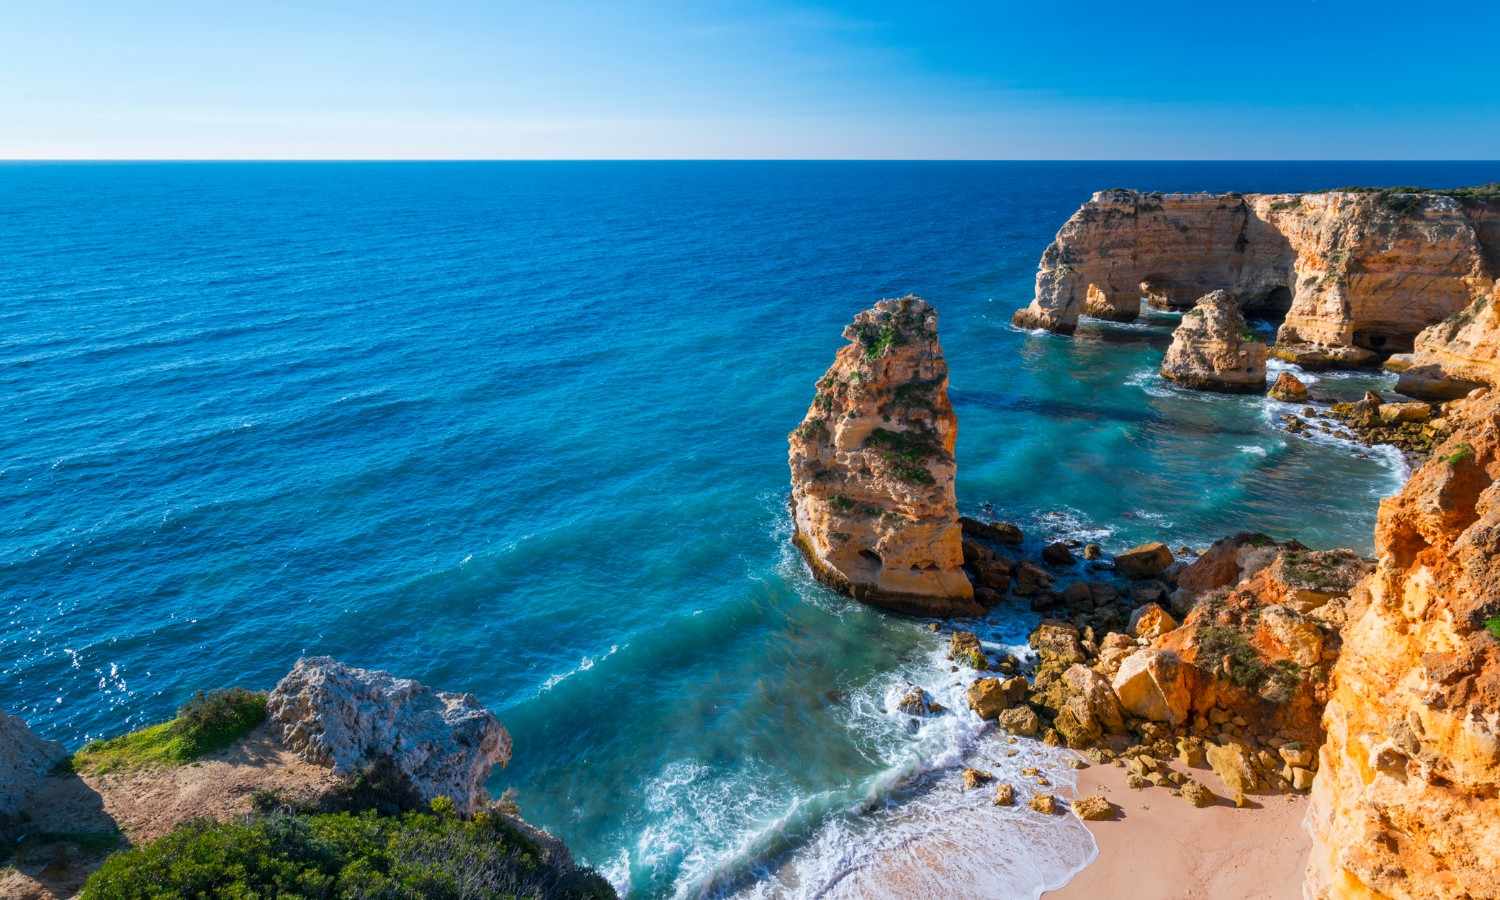 Where will Day 1 of our 7 Ways to Spend 7 Days in Portugal itinerary take you? The Algarve.